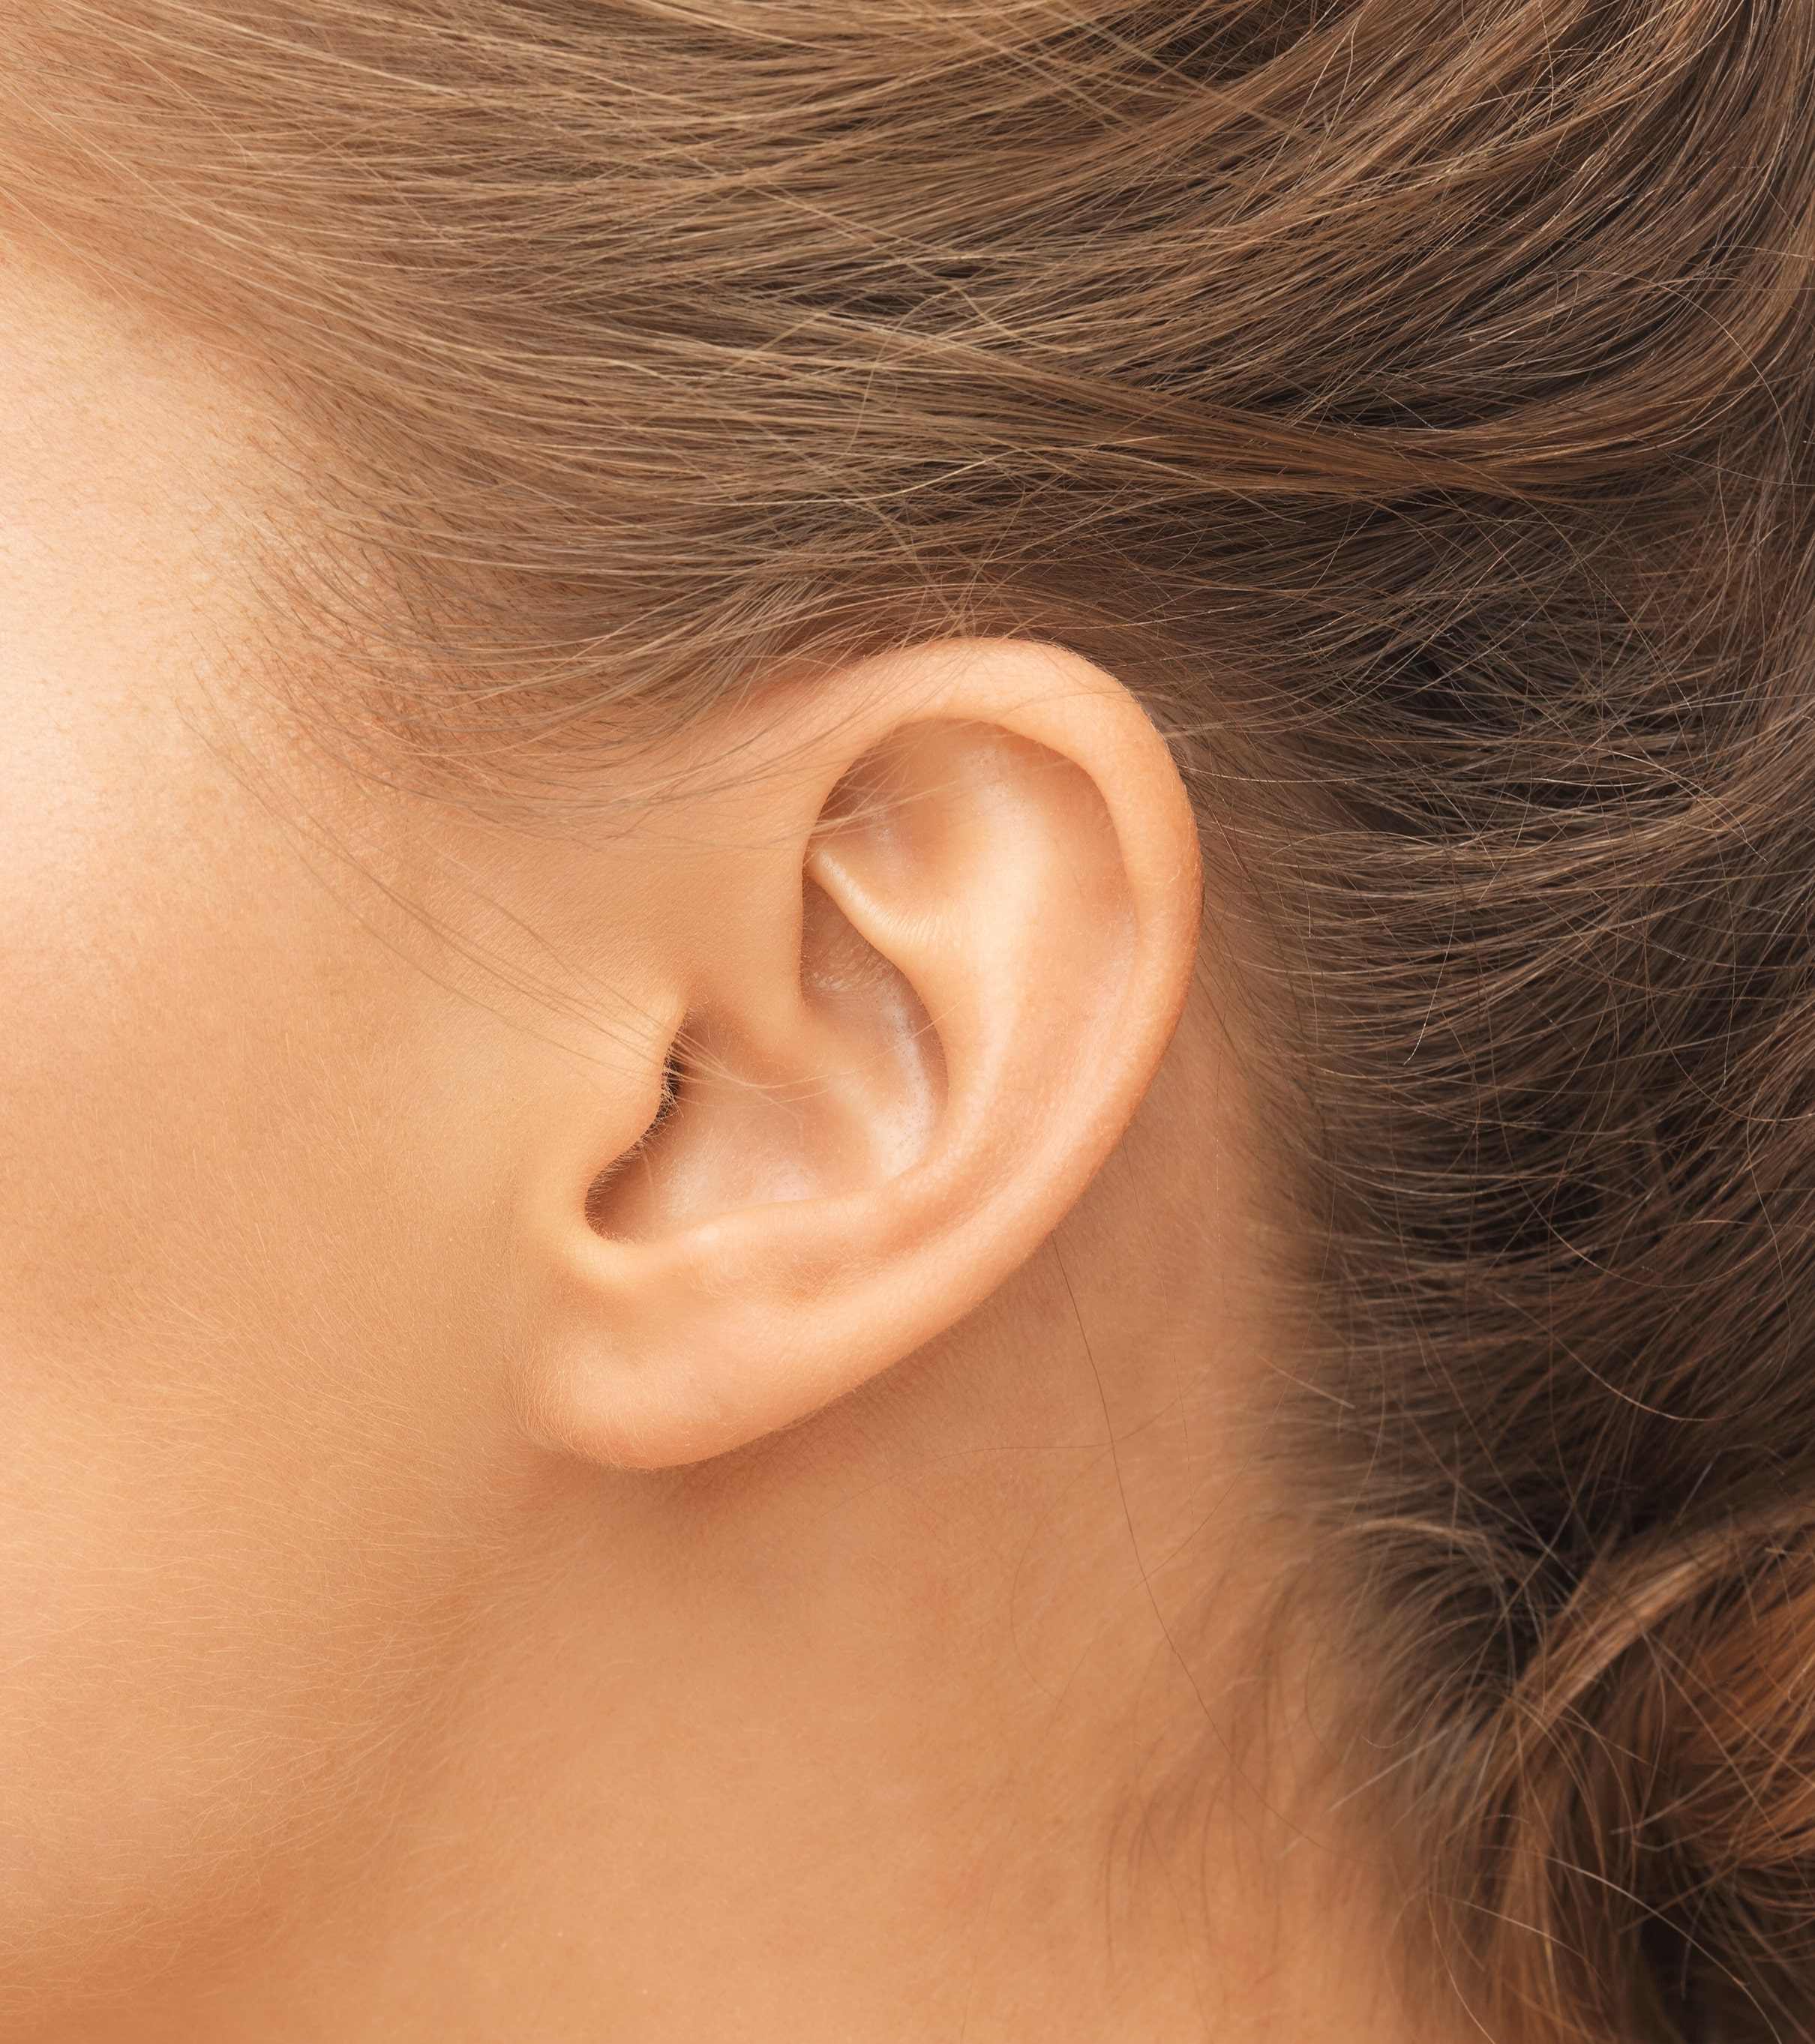 5 Questions People Ask Before an Earlobe Reconstruction Surgery